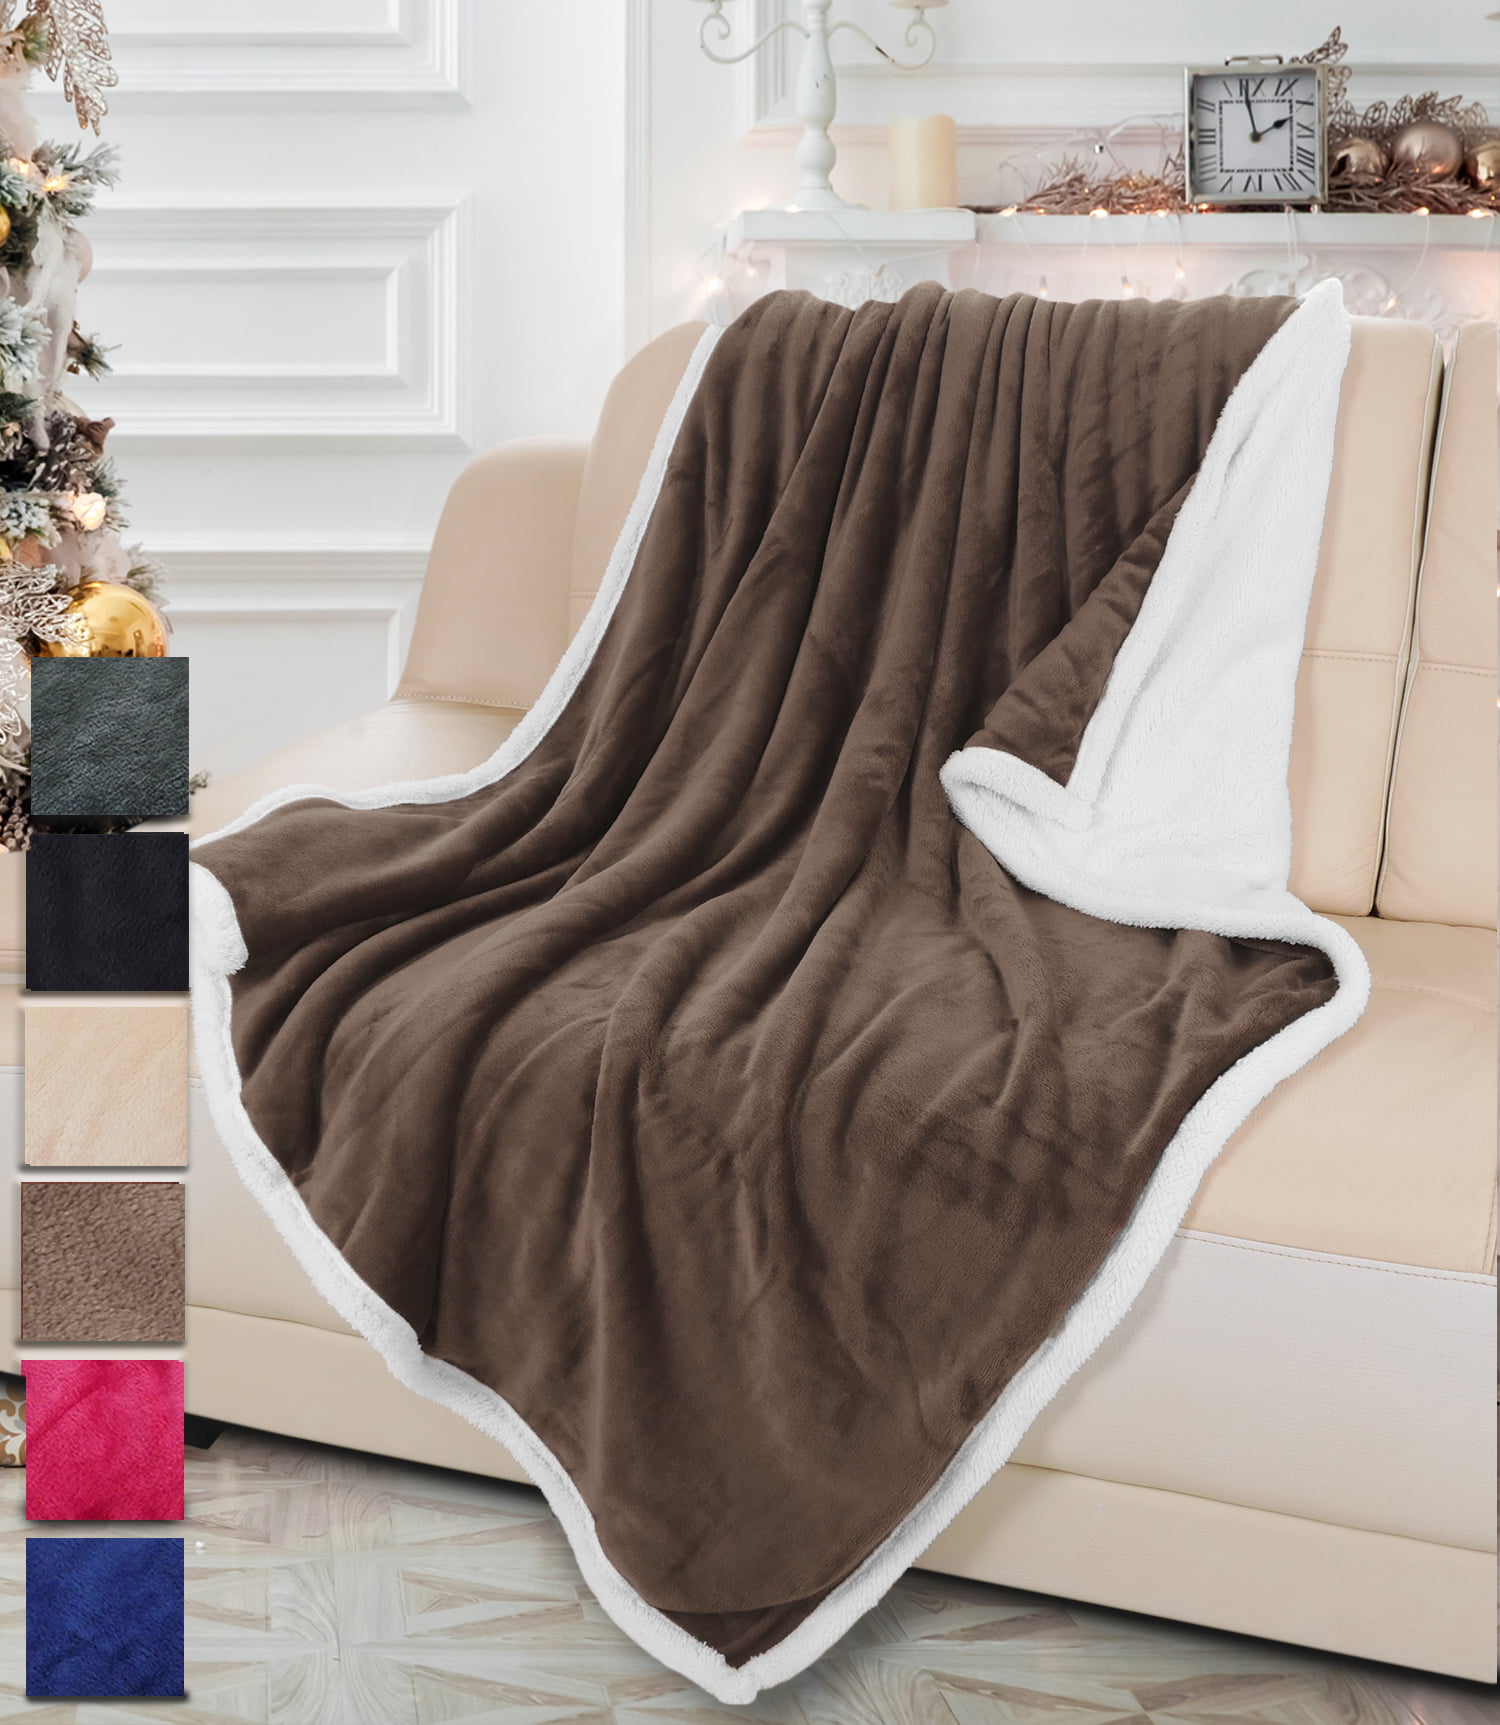 Grey, Twin/Double Kono Sherpa Fleece Throw Blanket 150*200cm Soft Cosy Fluffy Reversible Microfiber Solid Blankets for Bed Couch Sofa